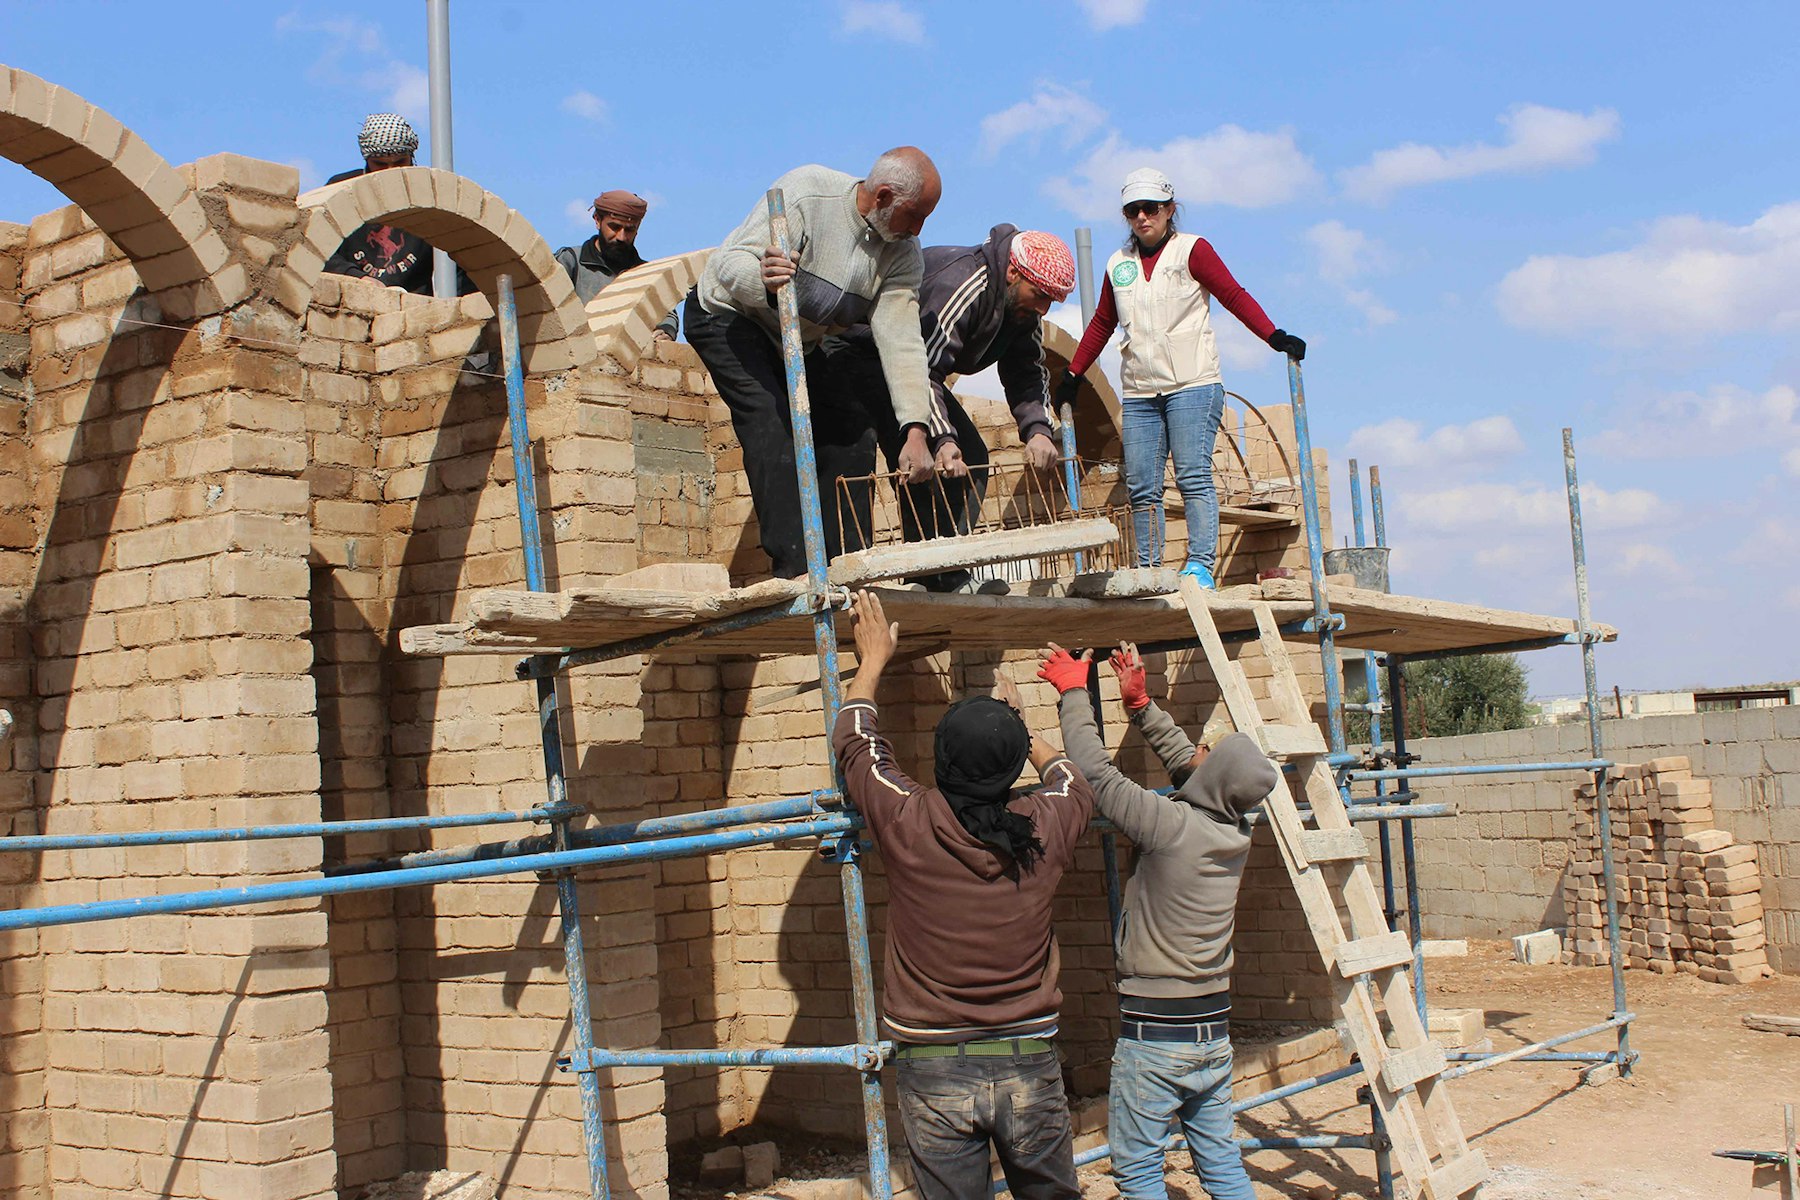 AKAH is introducing low-carbon, earth-based building technologies to provide affordable, sustainable and high-quality housing options in Syria.